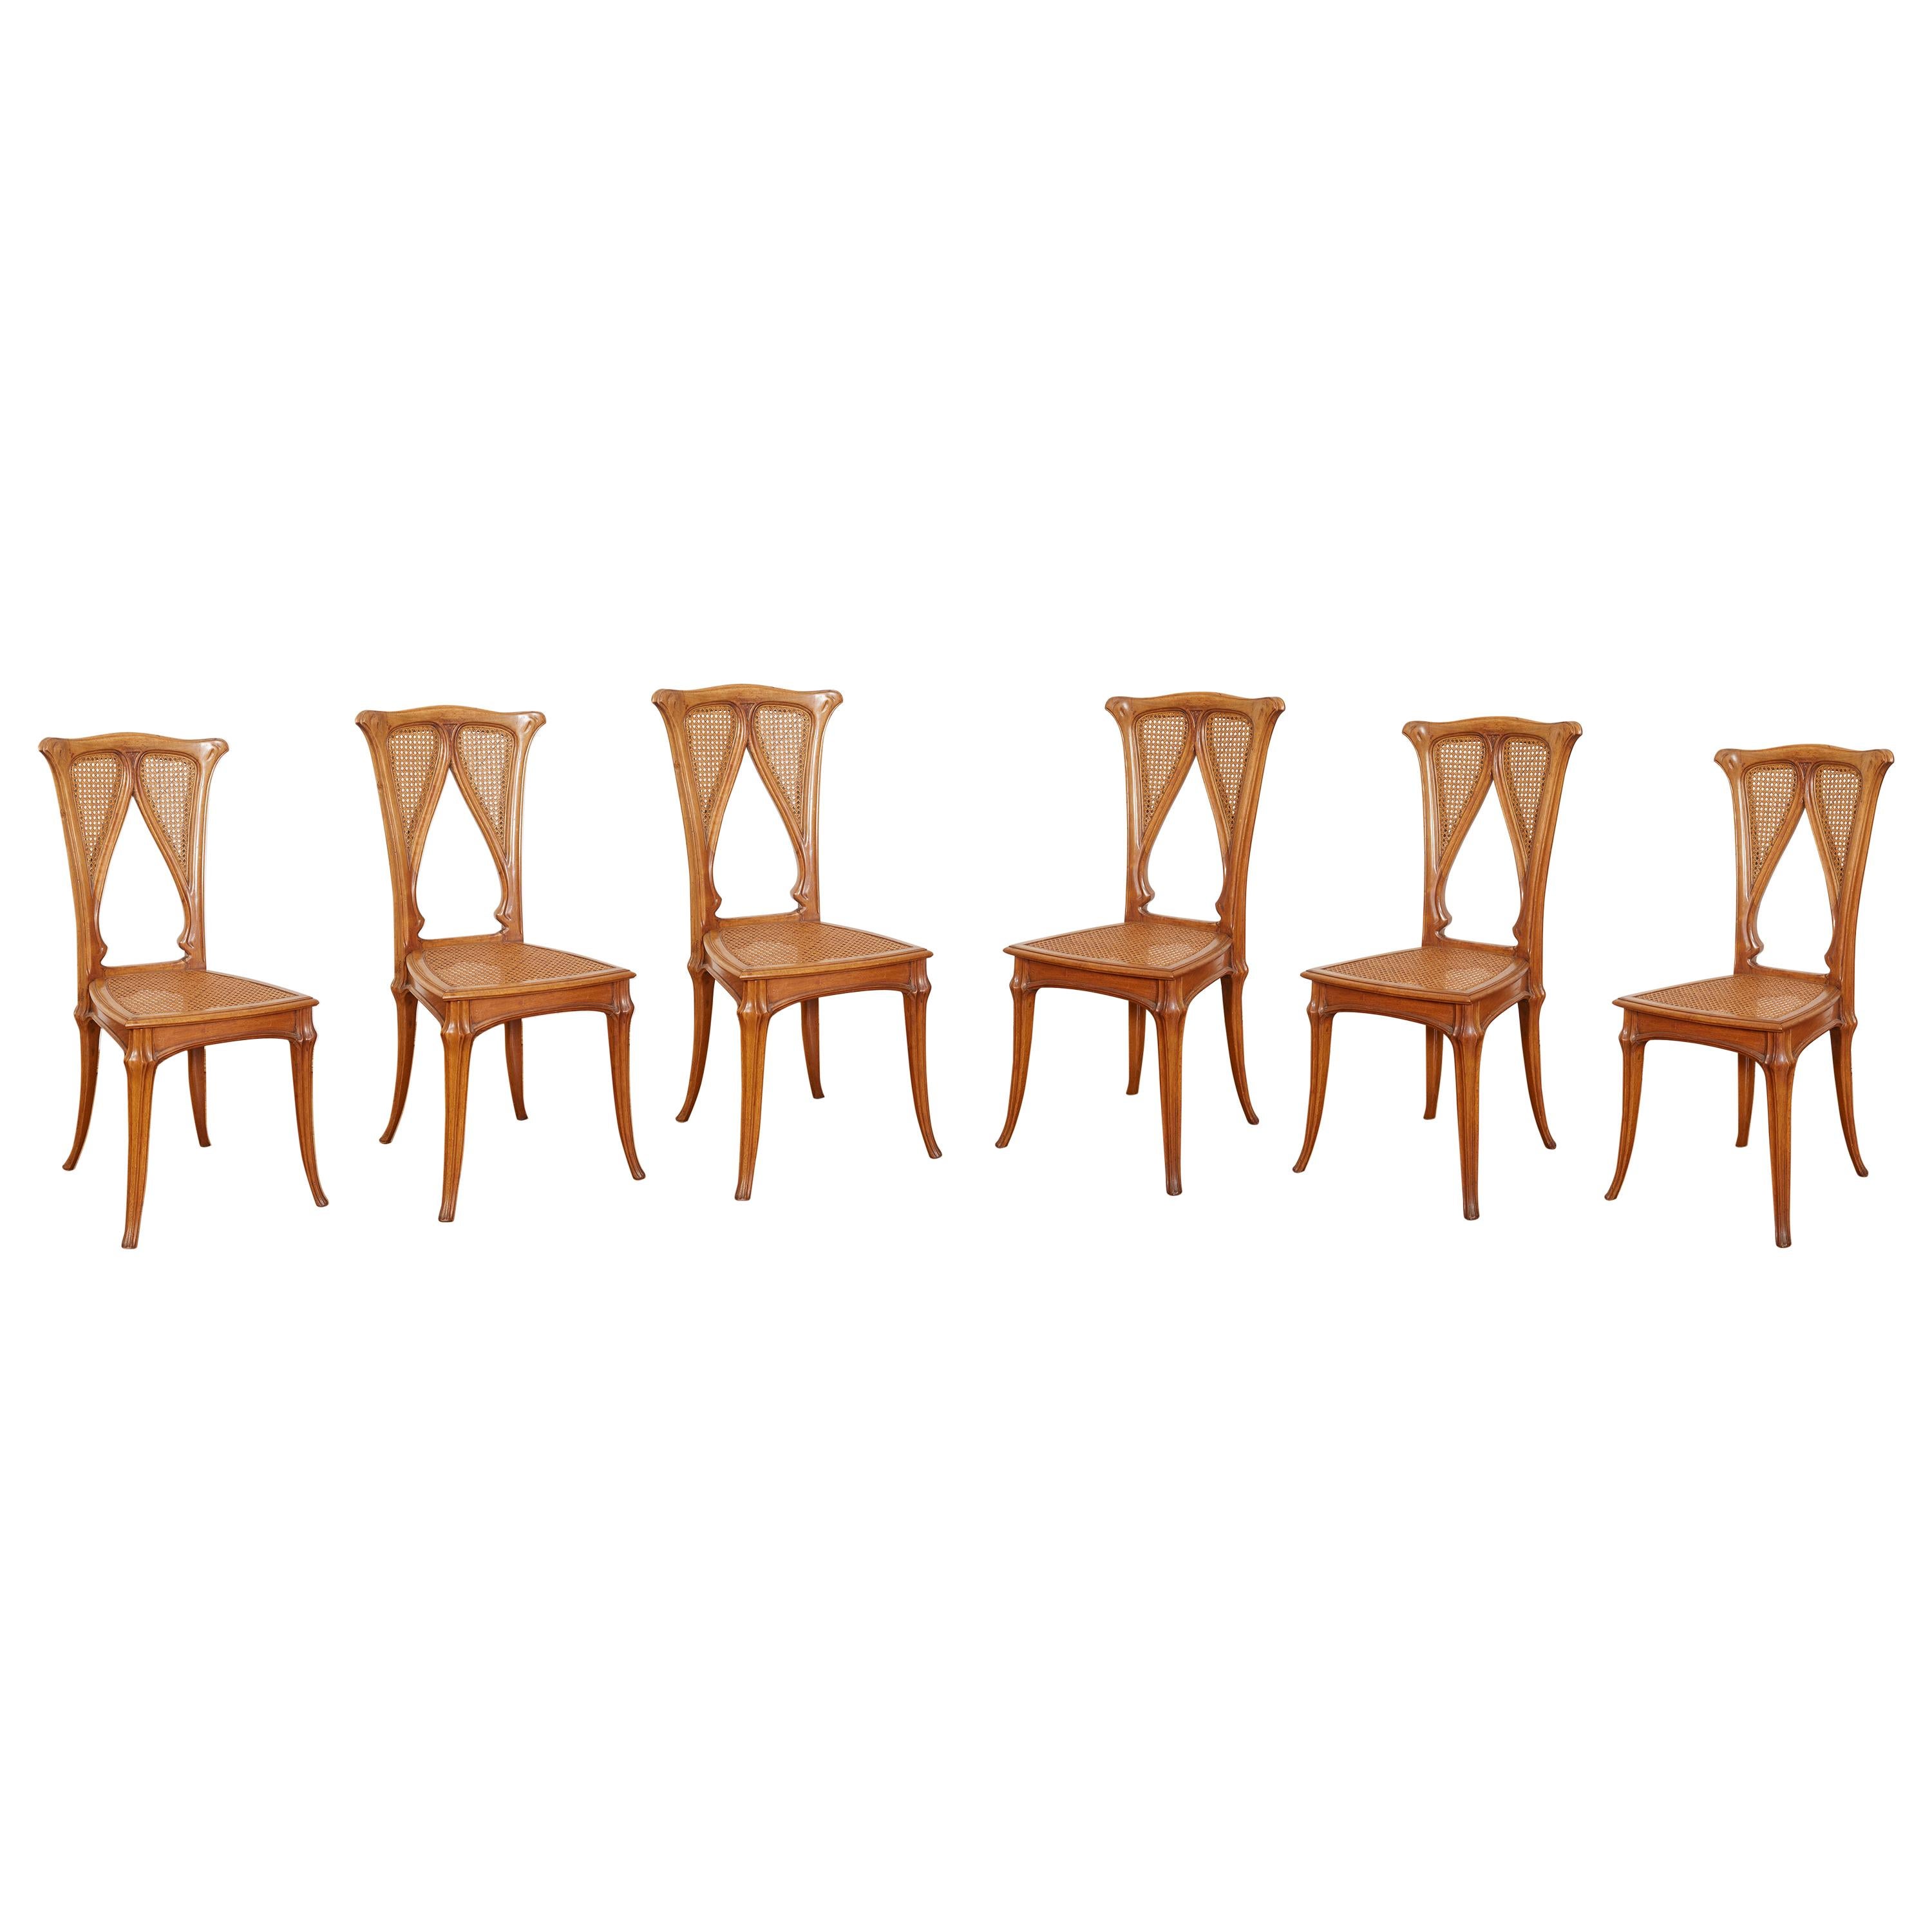 Galle Dining Room Chairs For Sale